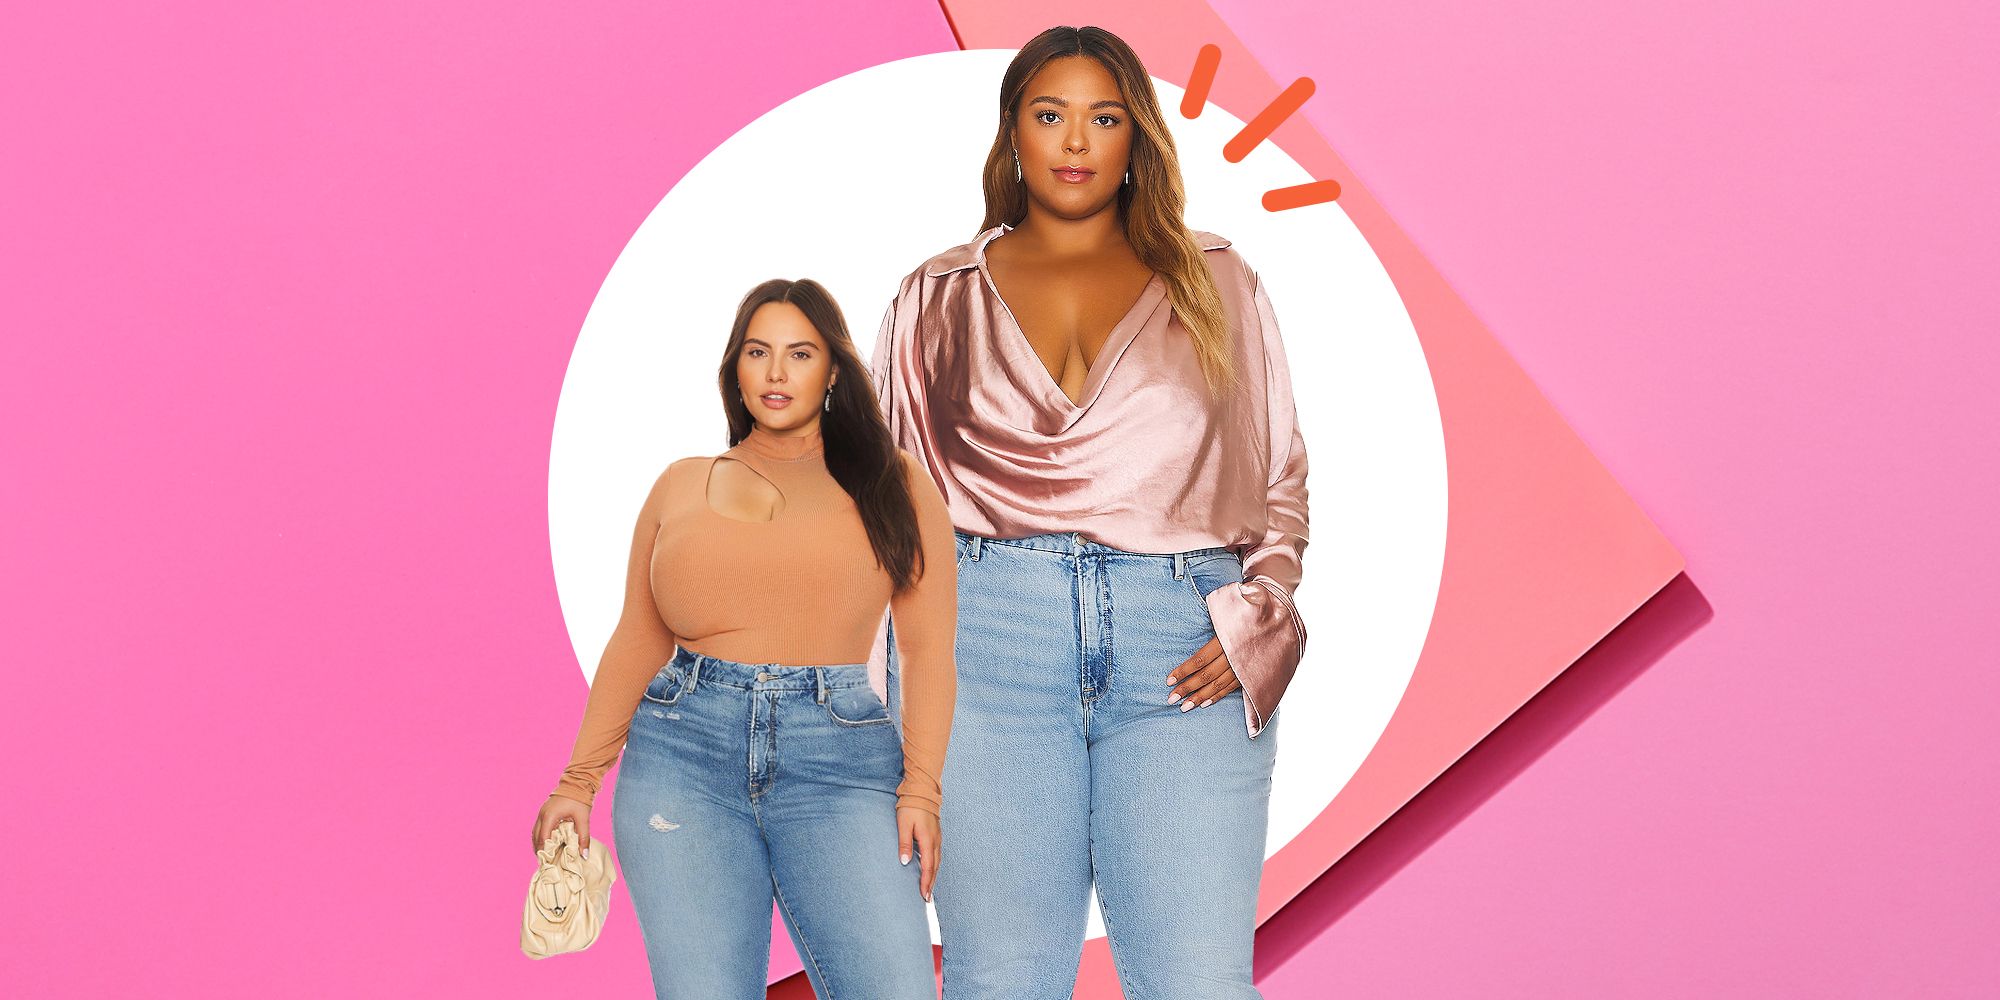 leather jogger outfit plus size｜TikTok Search